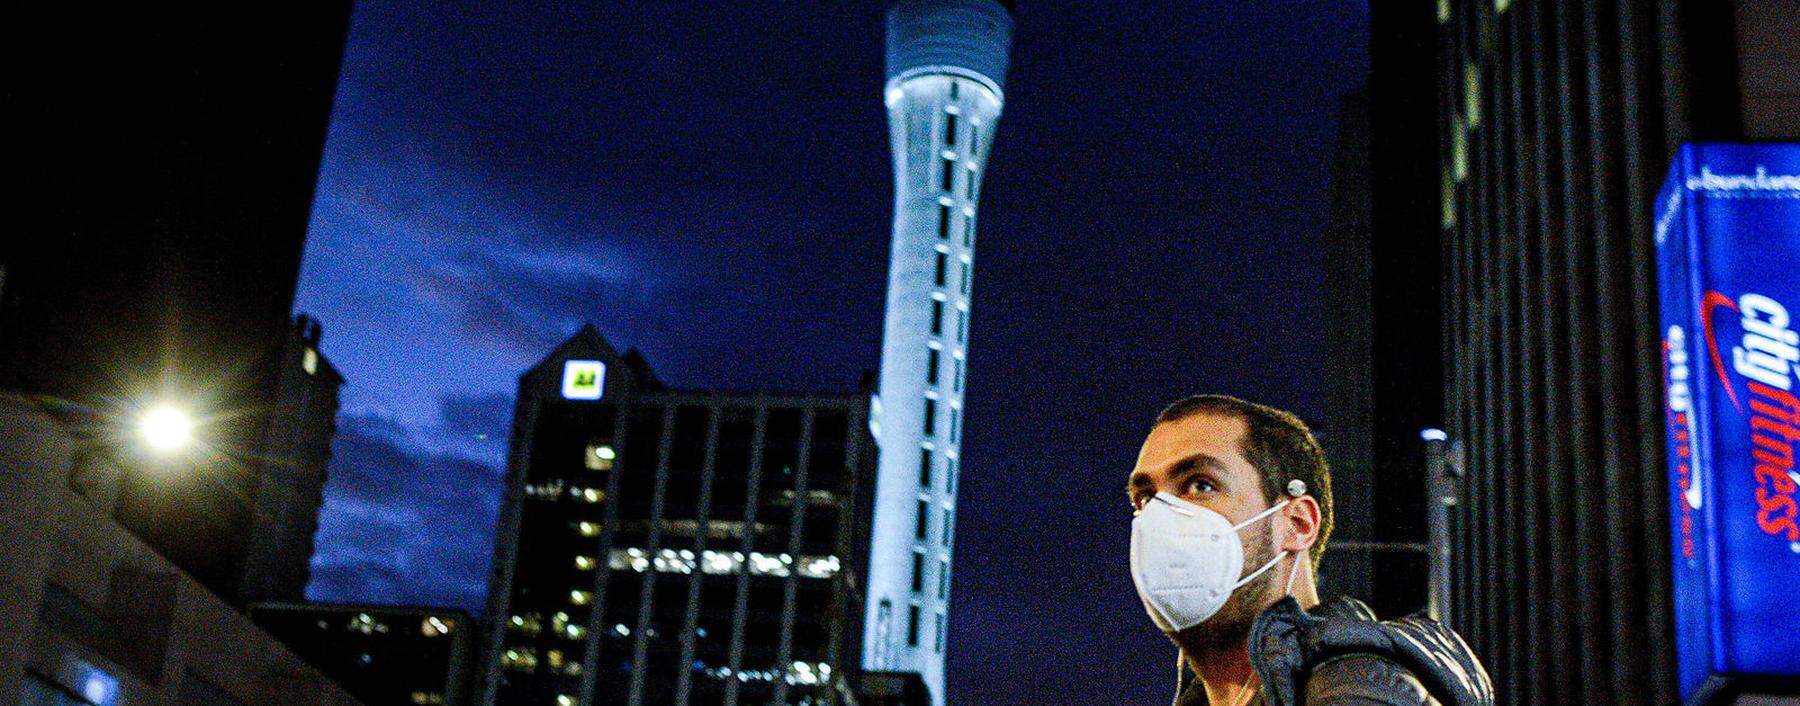 (200812) -- AUCKLAND, Aug. 12, 2020 (Xinhua) -- A man wearing a face mask is seen in downtown Auckland, New Zealand, Au